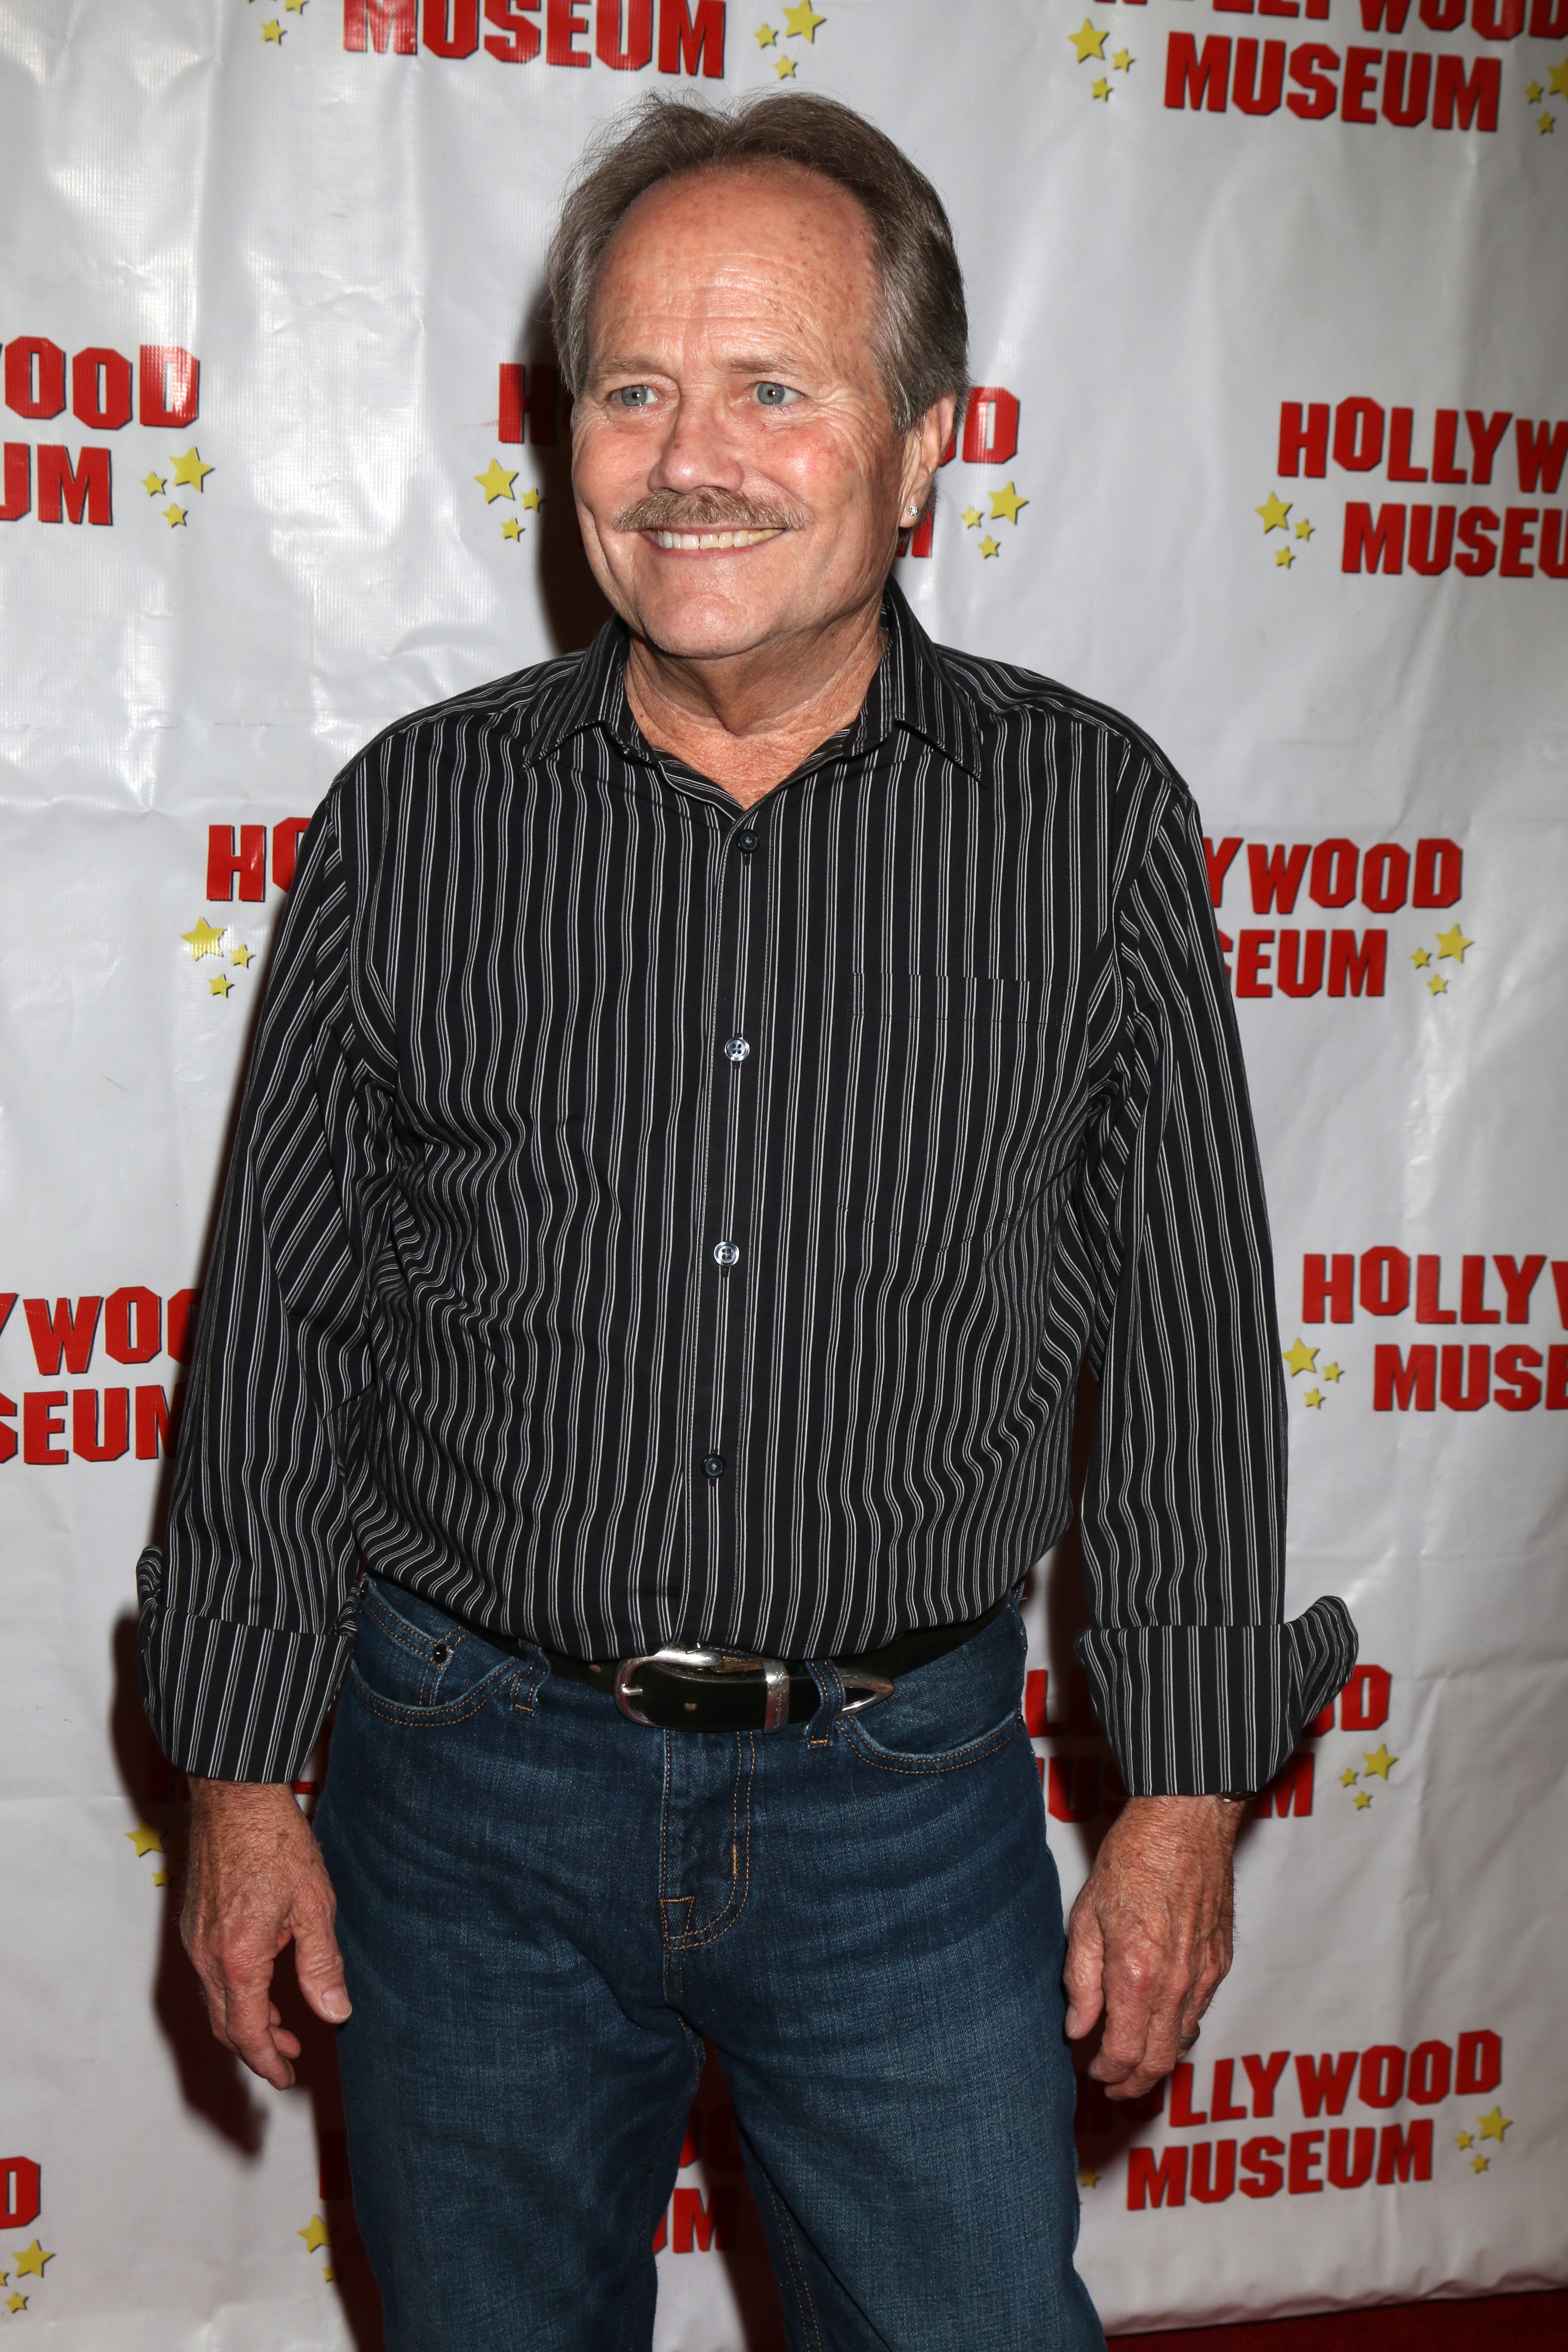 Jon Provost at the "Child Stars - Then And Now" preview reception on August 18, 2016, in Los Angeles, California. | Source: Kathy Hutchins/Shutterstock